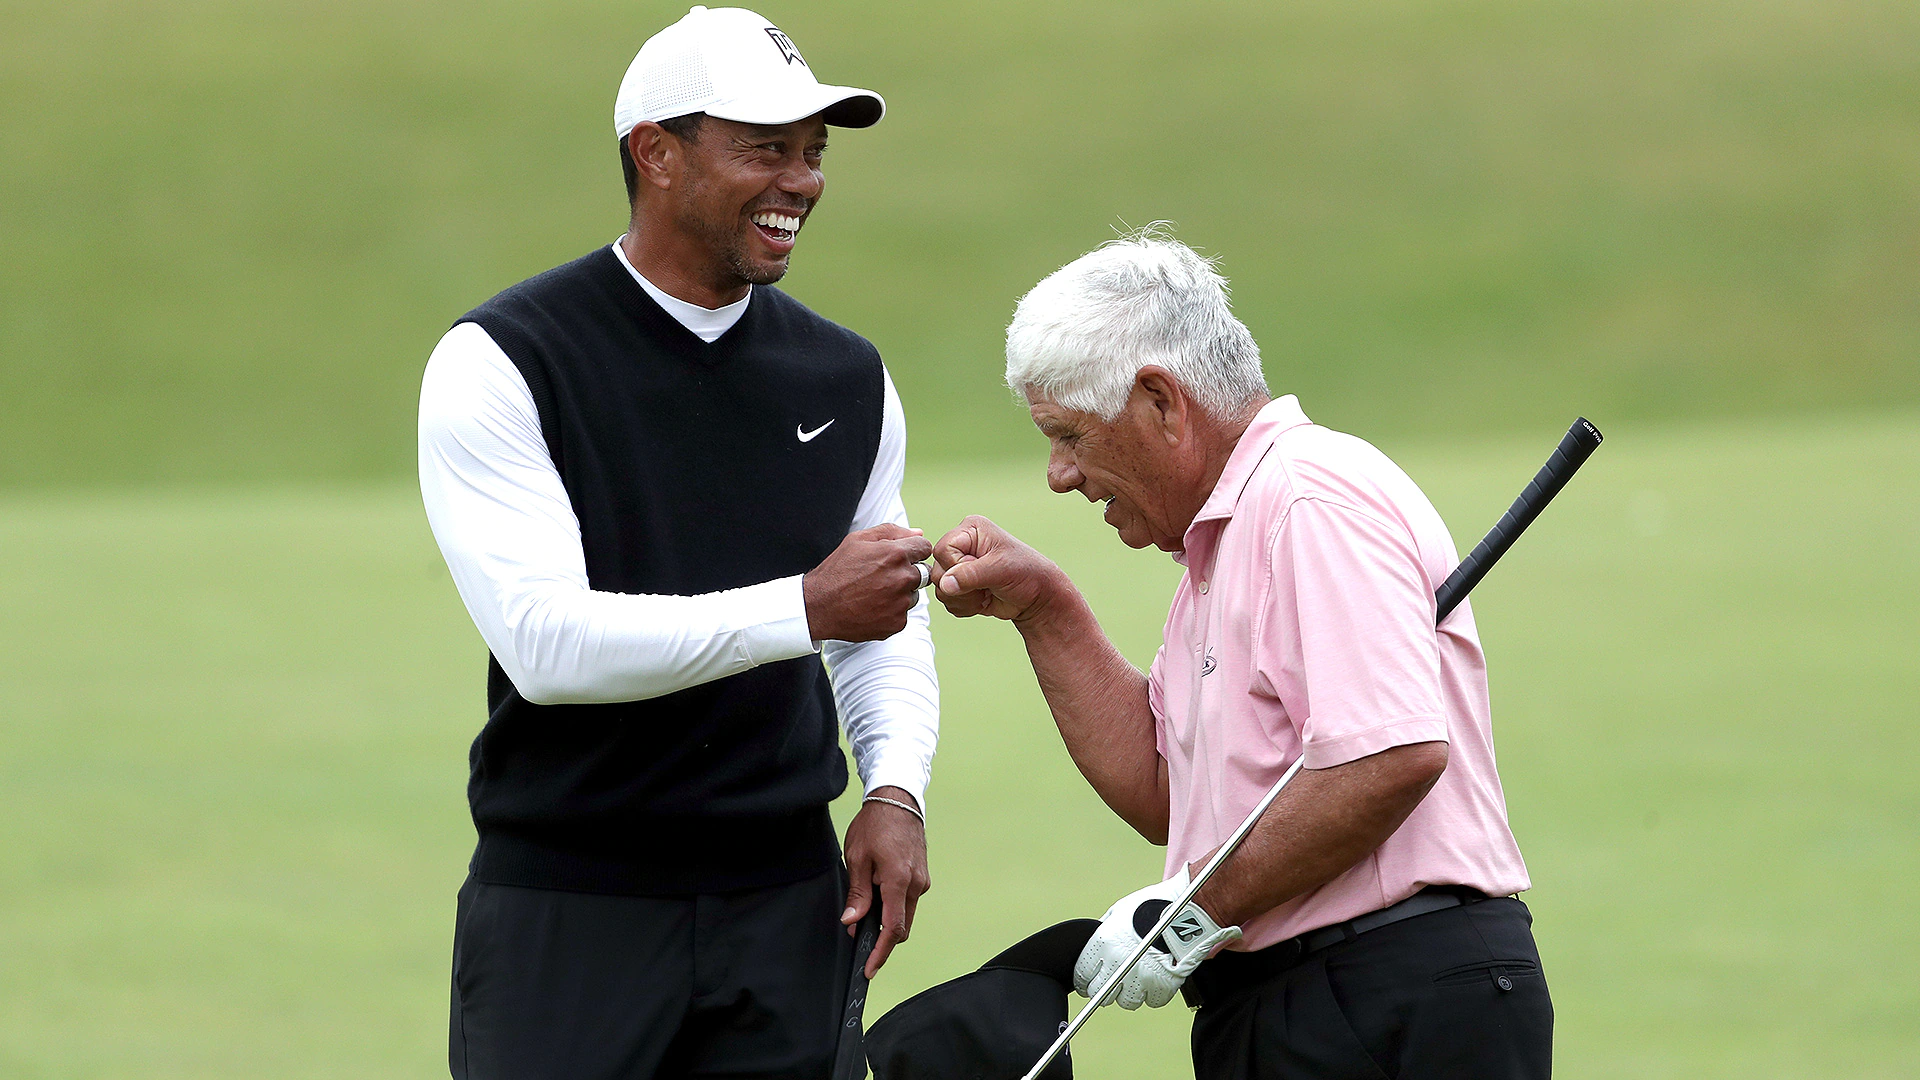 Lee Trevino says Tiger Woods’ only problem is walking. The rest is good.